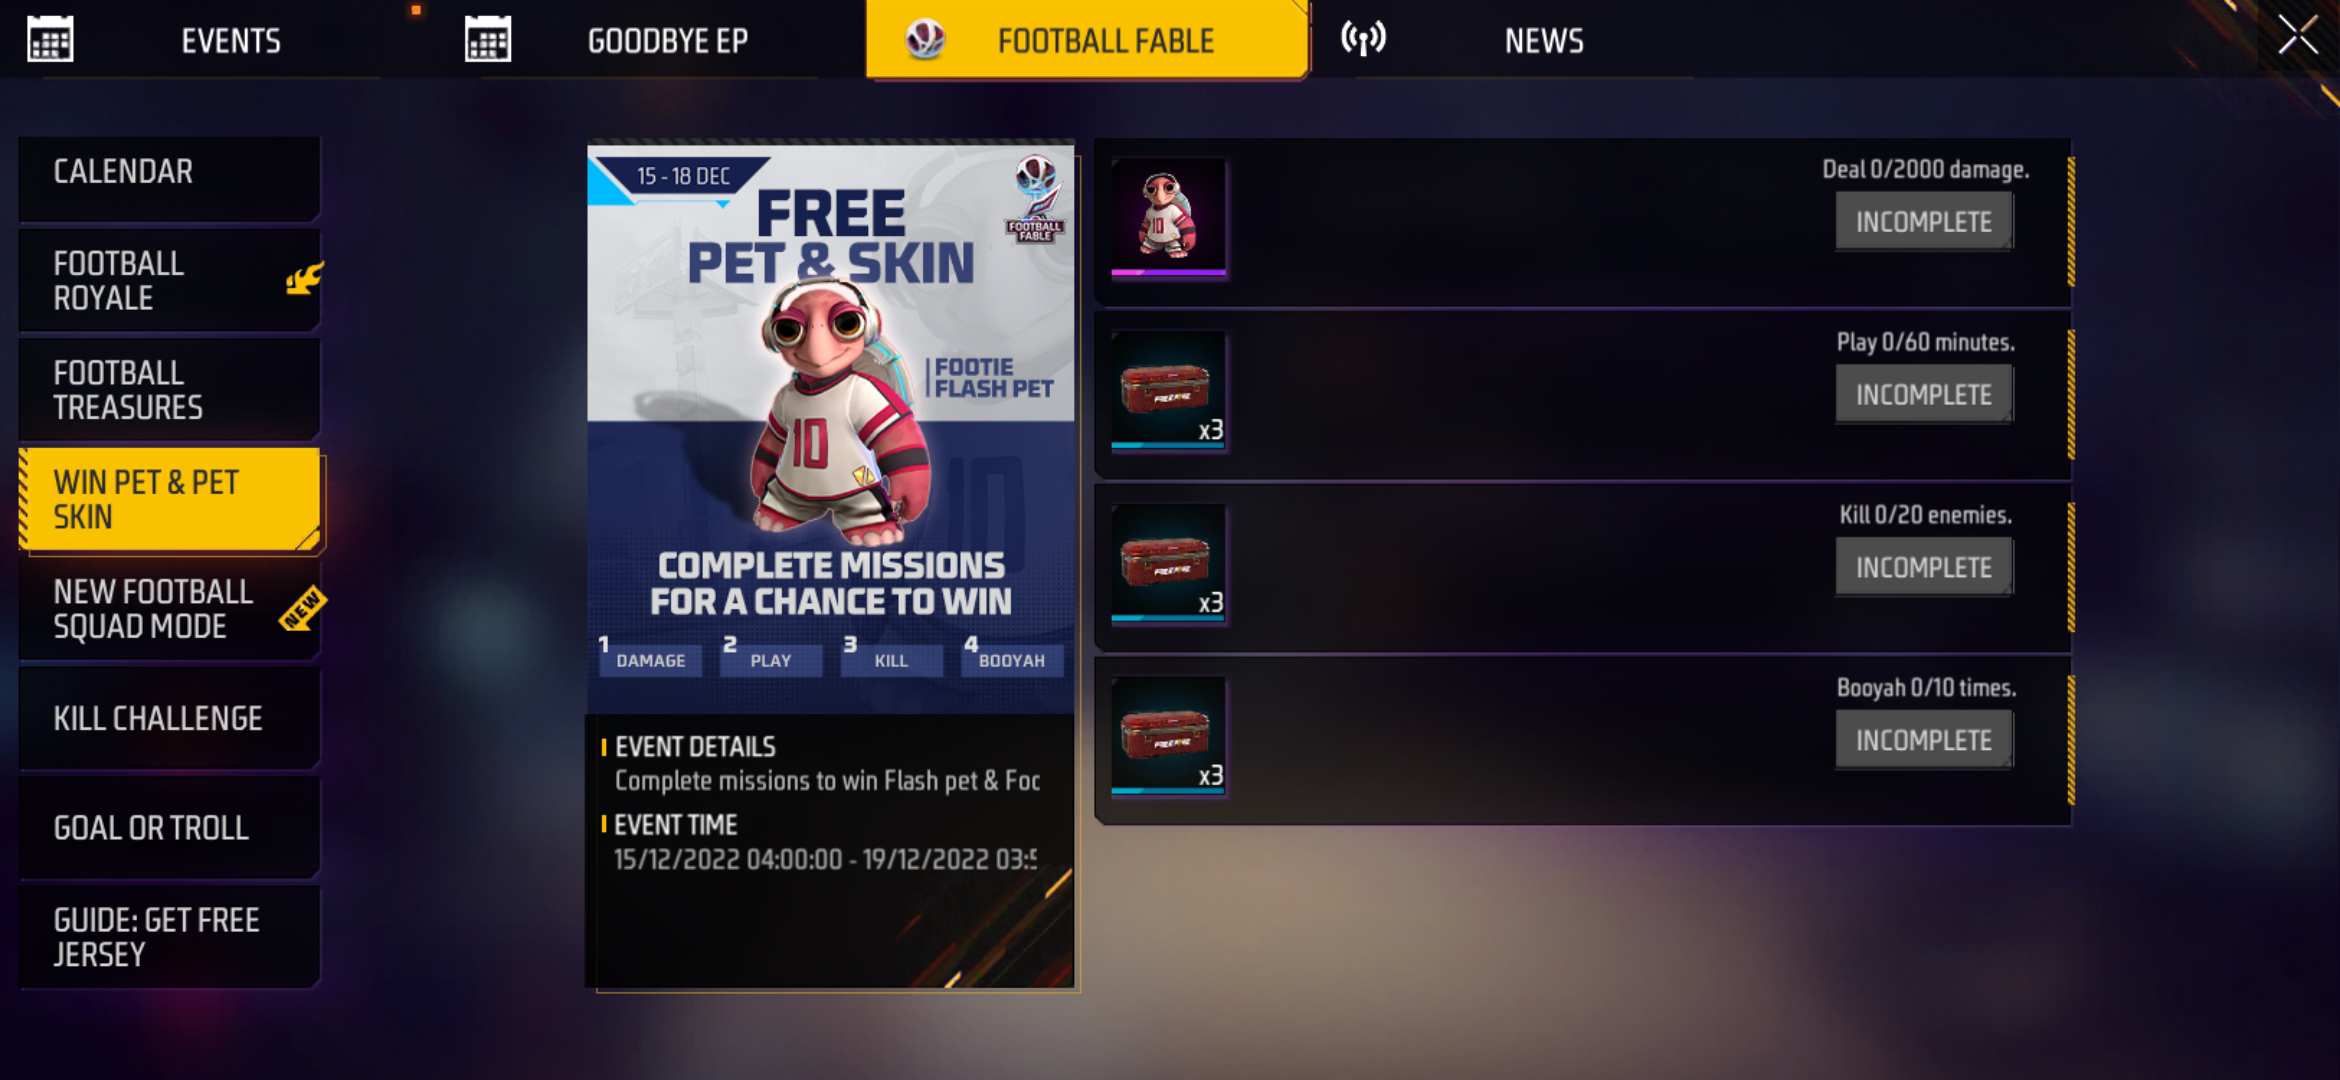 How To Get Pet And Pet Skin For Free In Free Fire?